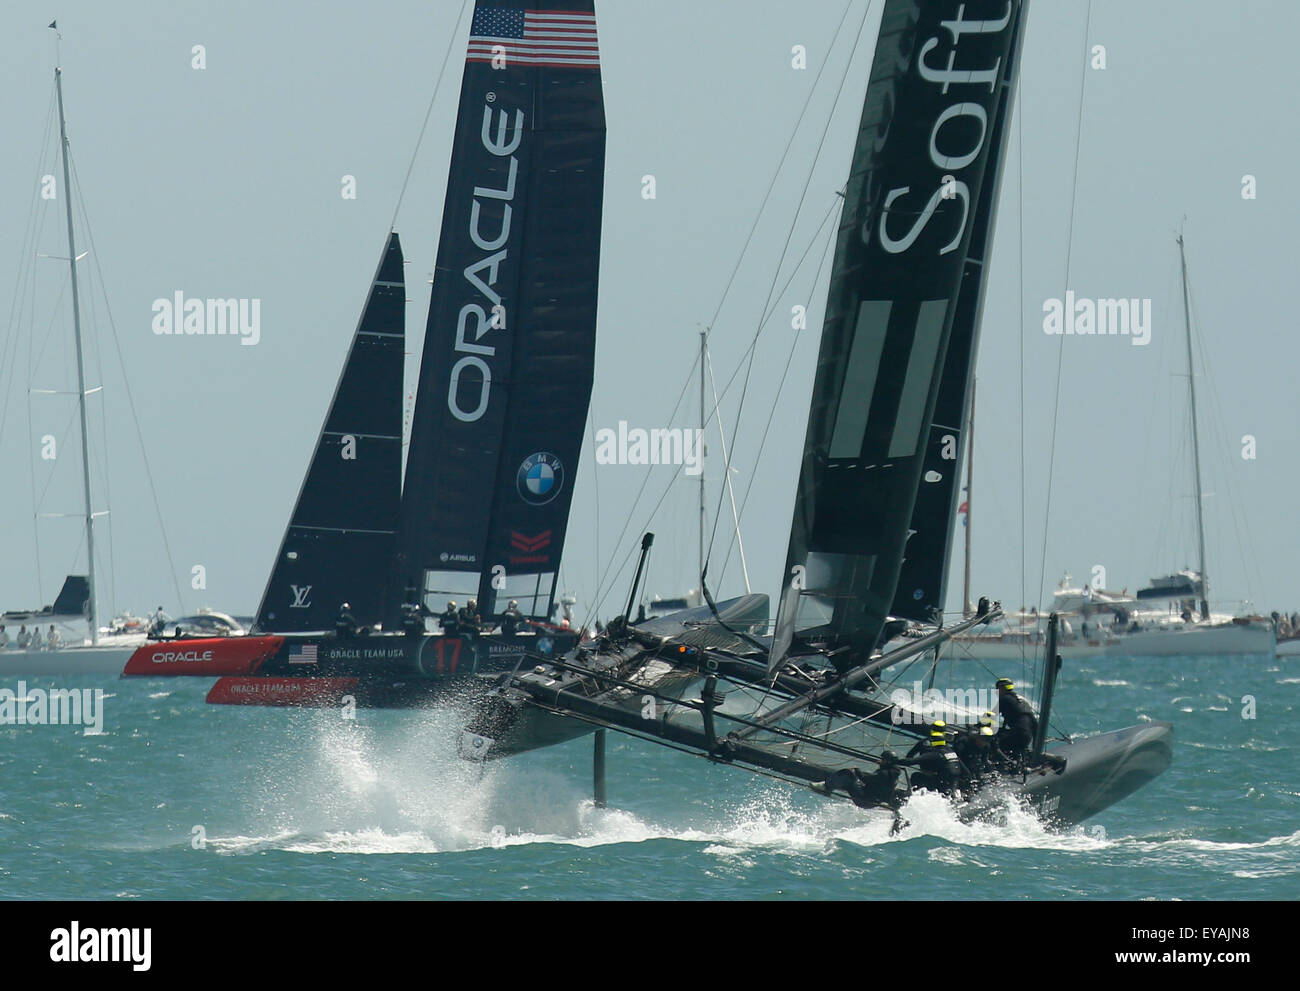 Portsmouth, UK. 25th July, 2015. Participating teams (L-R) Oracle Team USA and SoftBank Team Japan compete in the first official race of the 35th America's Cup World Series Races at Portsmouth in Hampshire, UK Saturday July 25, 2015. The 2015 Portsmouth racing of the Louis Vuitton America's Cup World Series counts towards the qualifiers and playoffs which determine the challenger to compete against the title holders Oracle Team USA in 2017. Credit:  Luke MacGregor/Alamy Live News Stock Photo